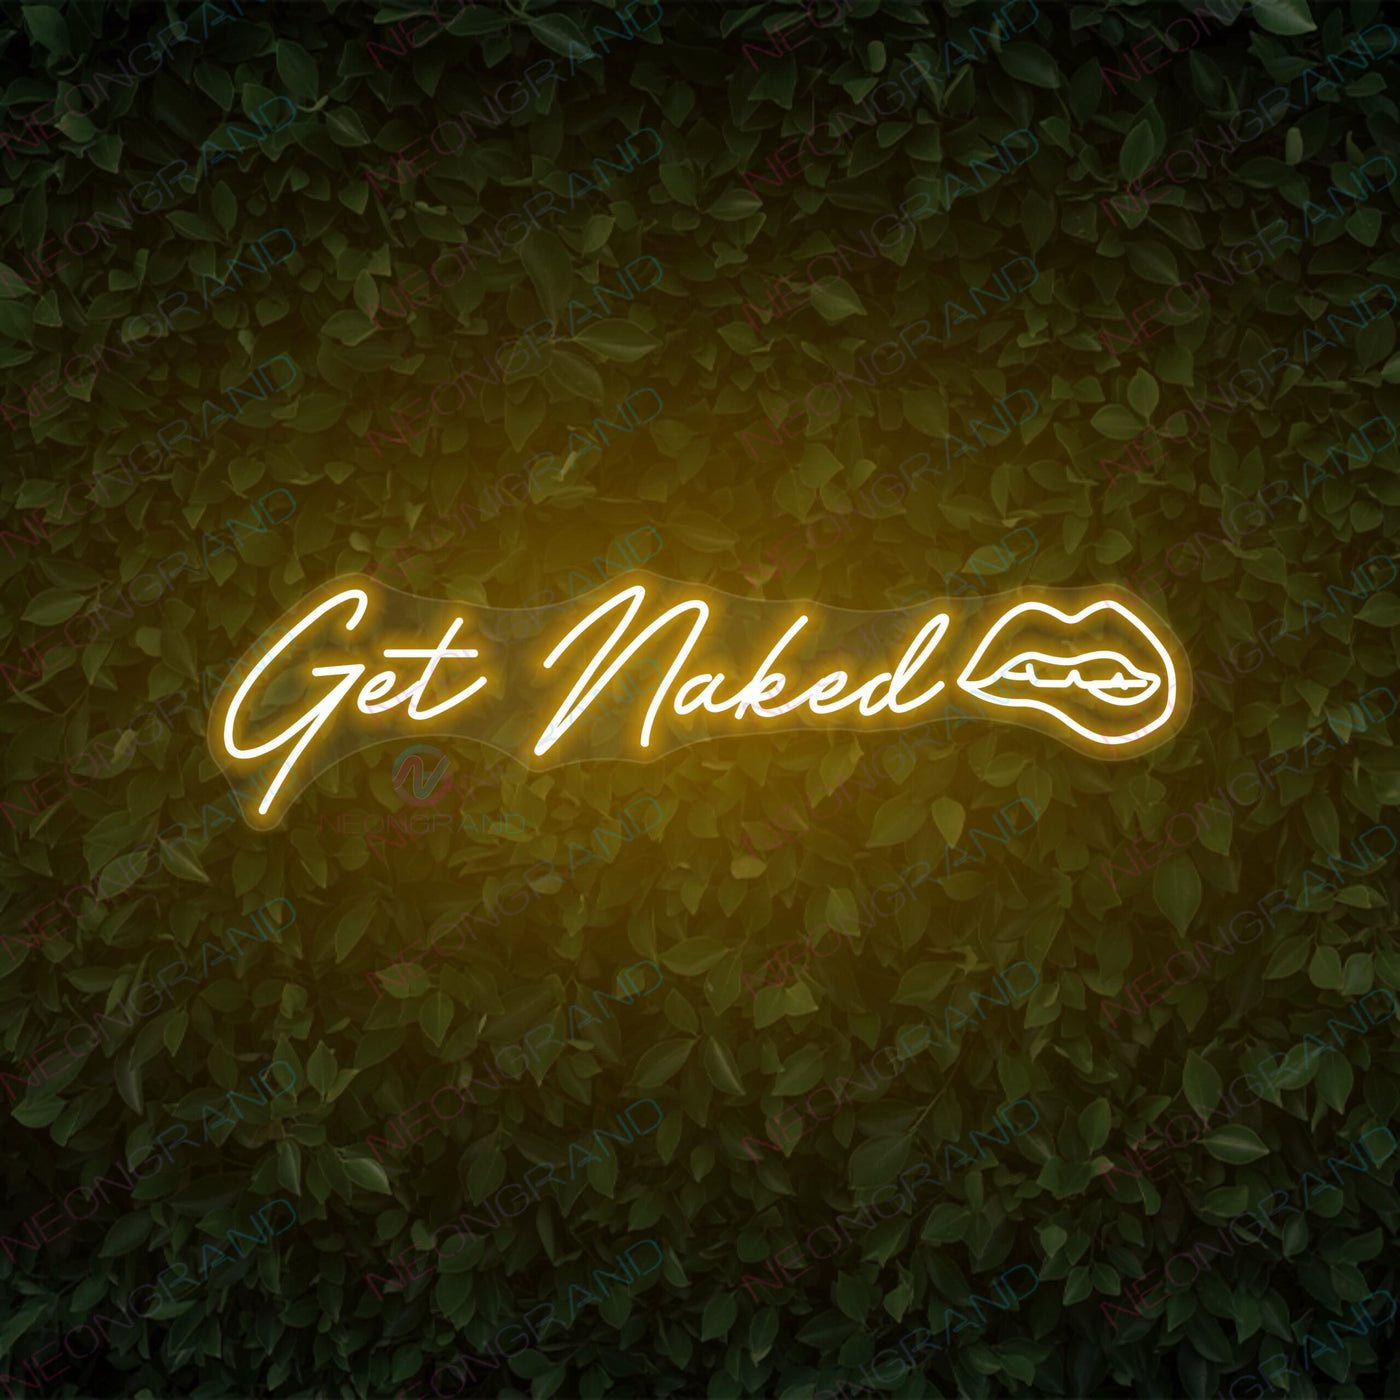 Get Naked Neon Sign Sexy Lips Led Light orange yellow